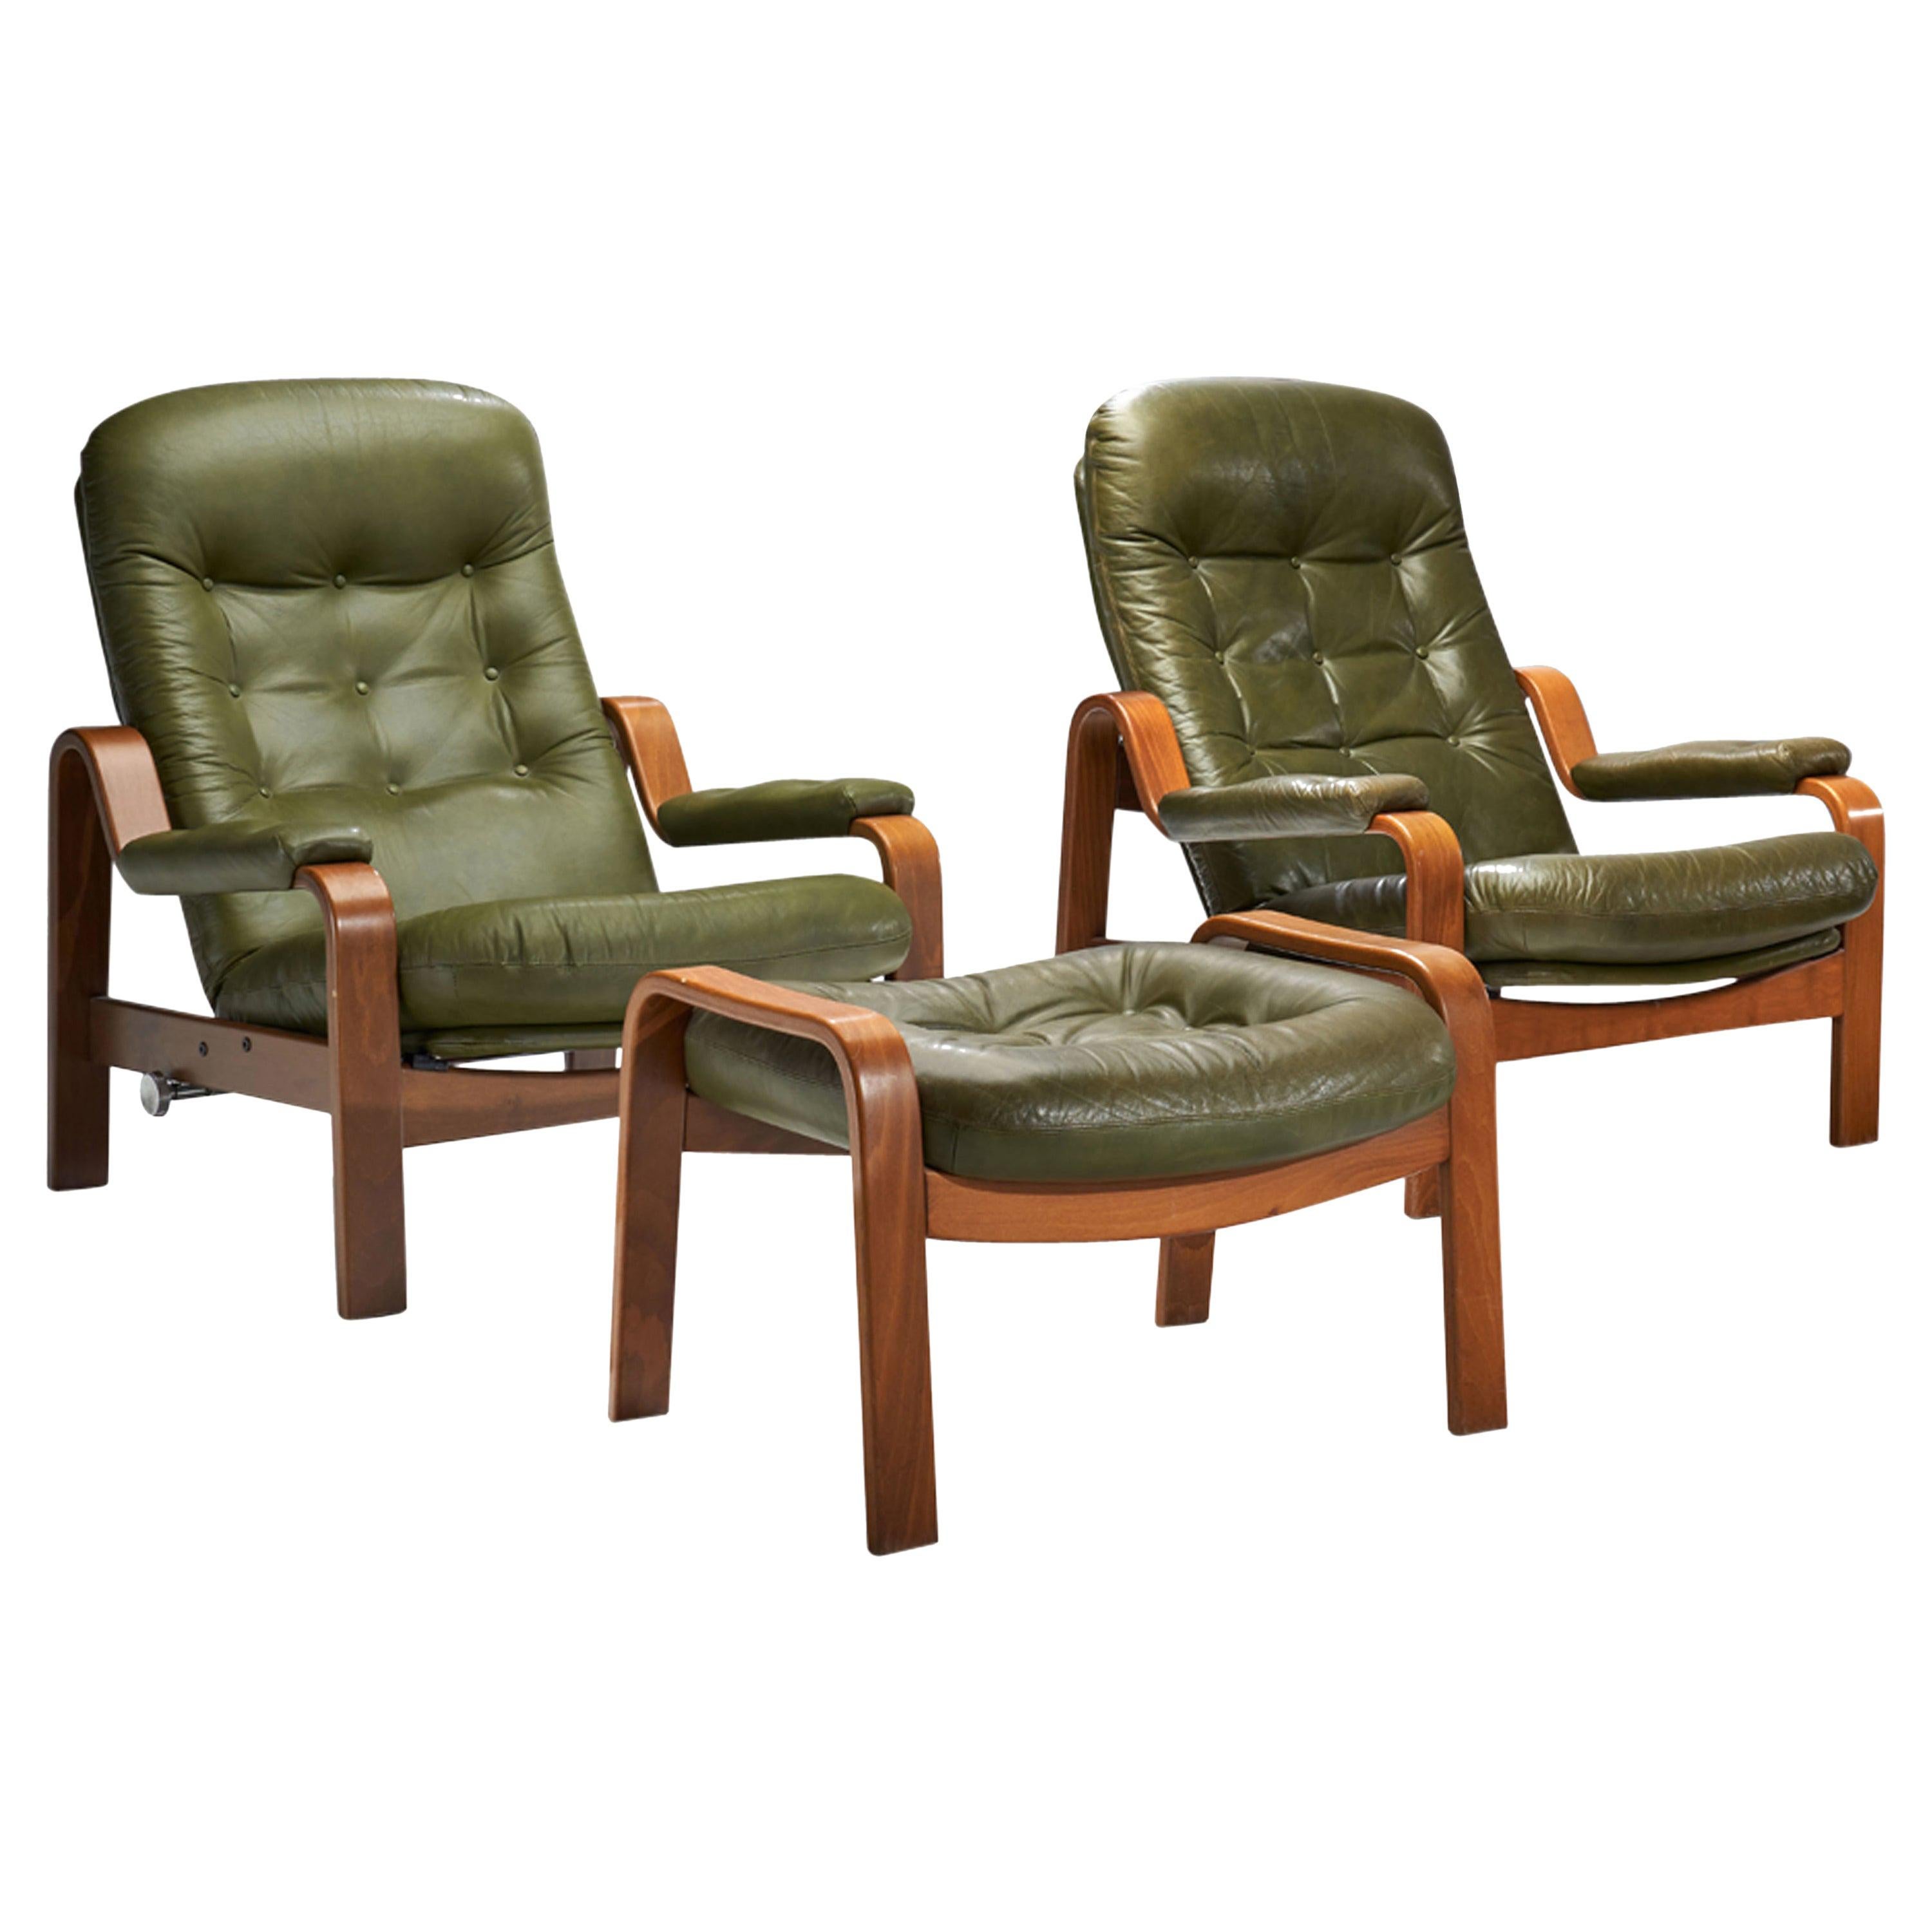 Pair of “Relax II” Chairs and a Foot Stool by Göte Möbler Nassjö AB, Sweden  1970 For Sale at 1stDibs